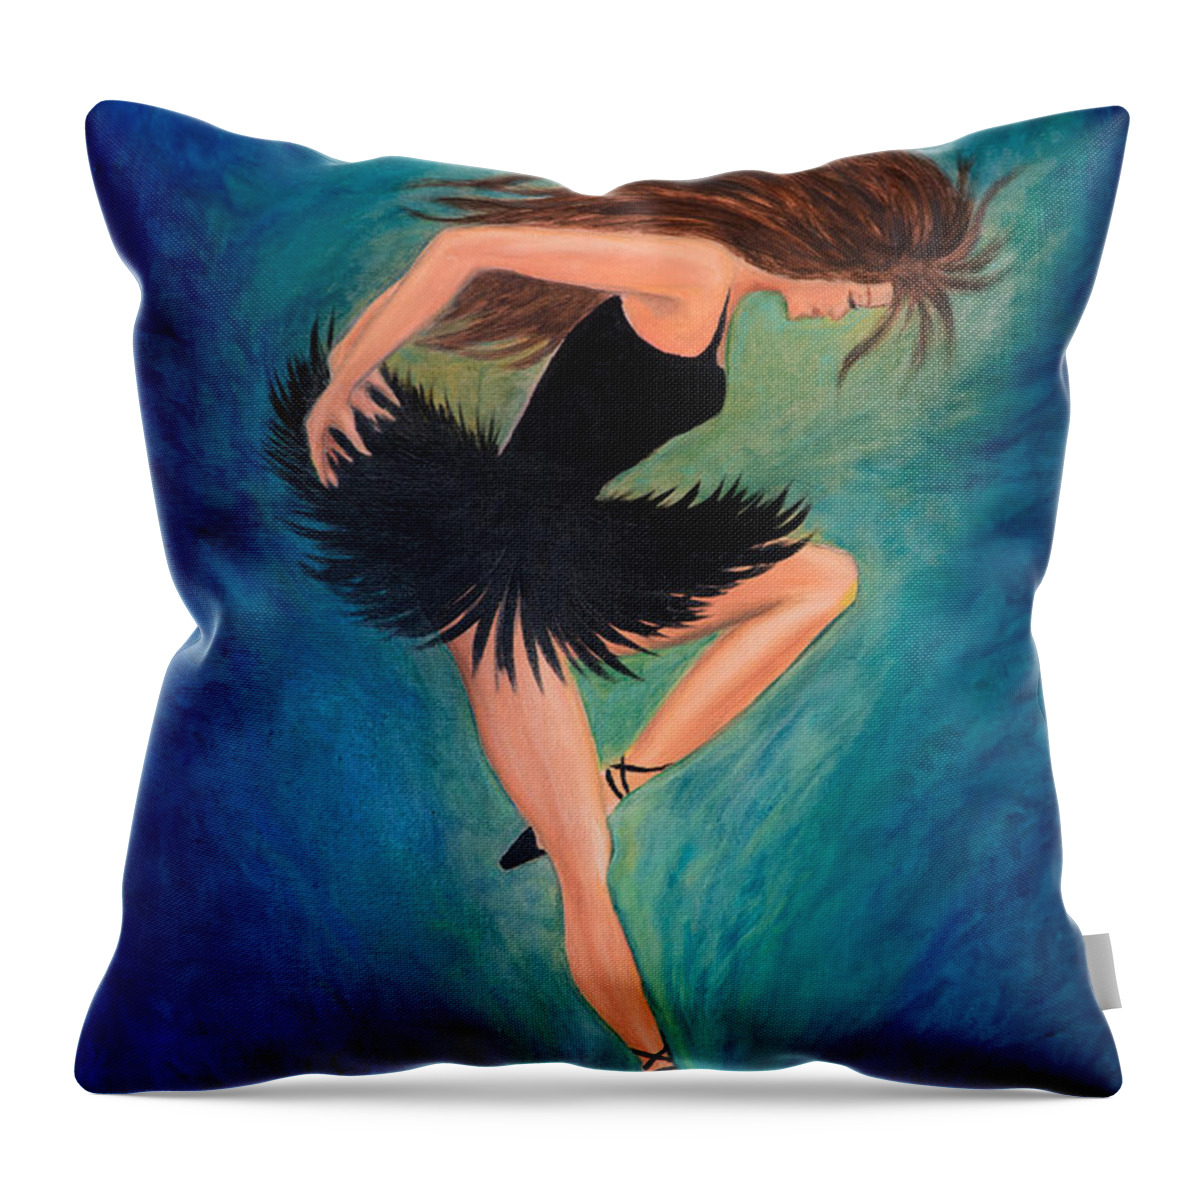 Ballerina Throw Pillow featuring the painting Ballerina Dancer by Lilia S